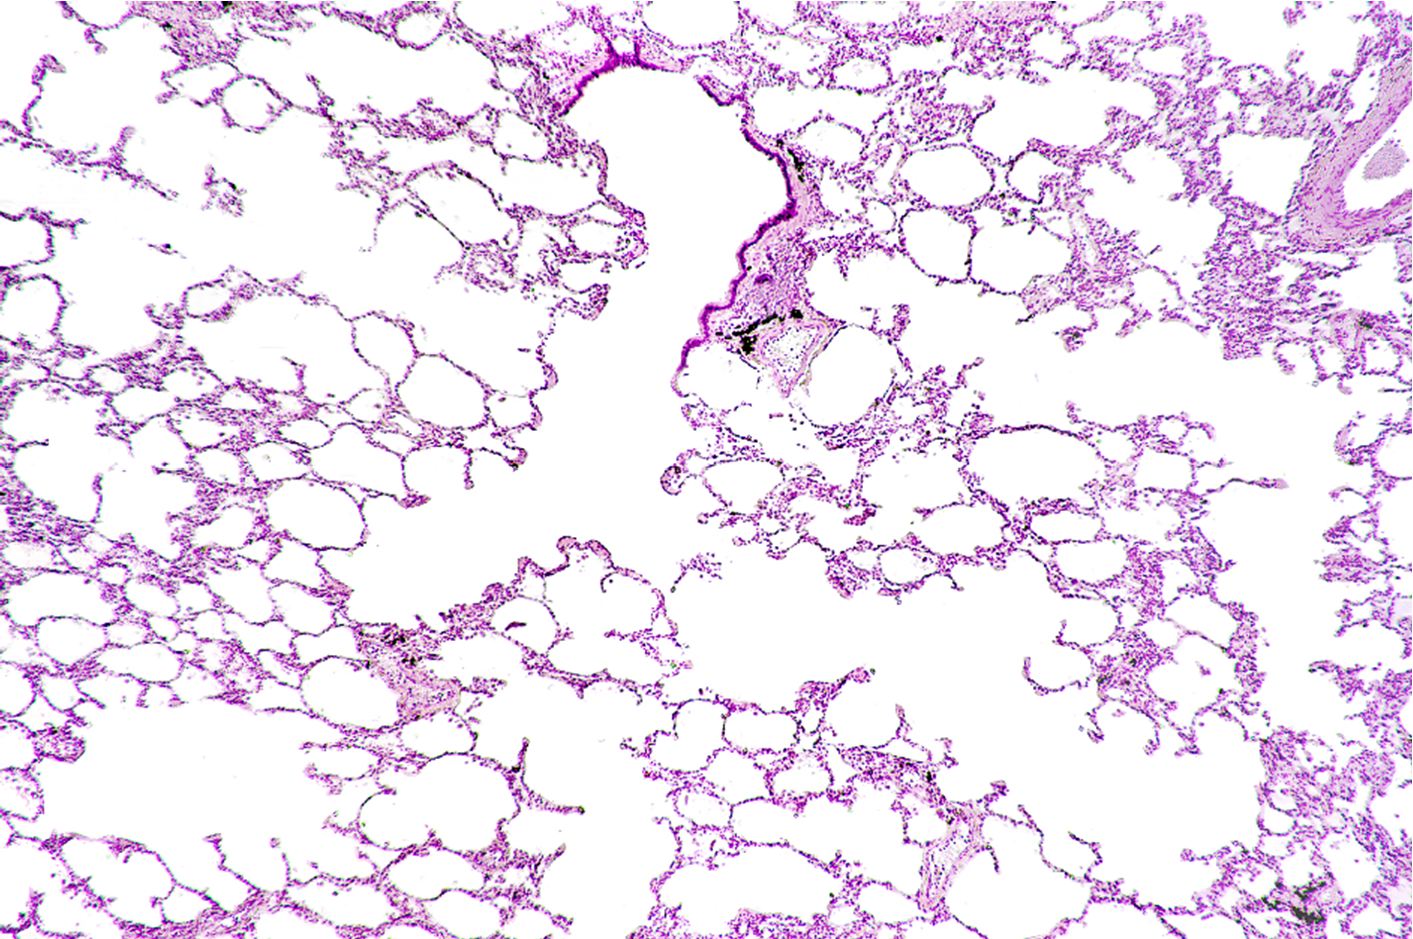 Microscopic image of lung tissue for labeling